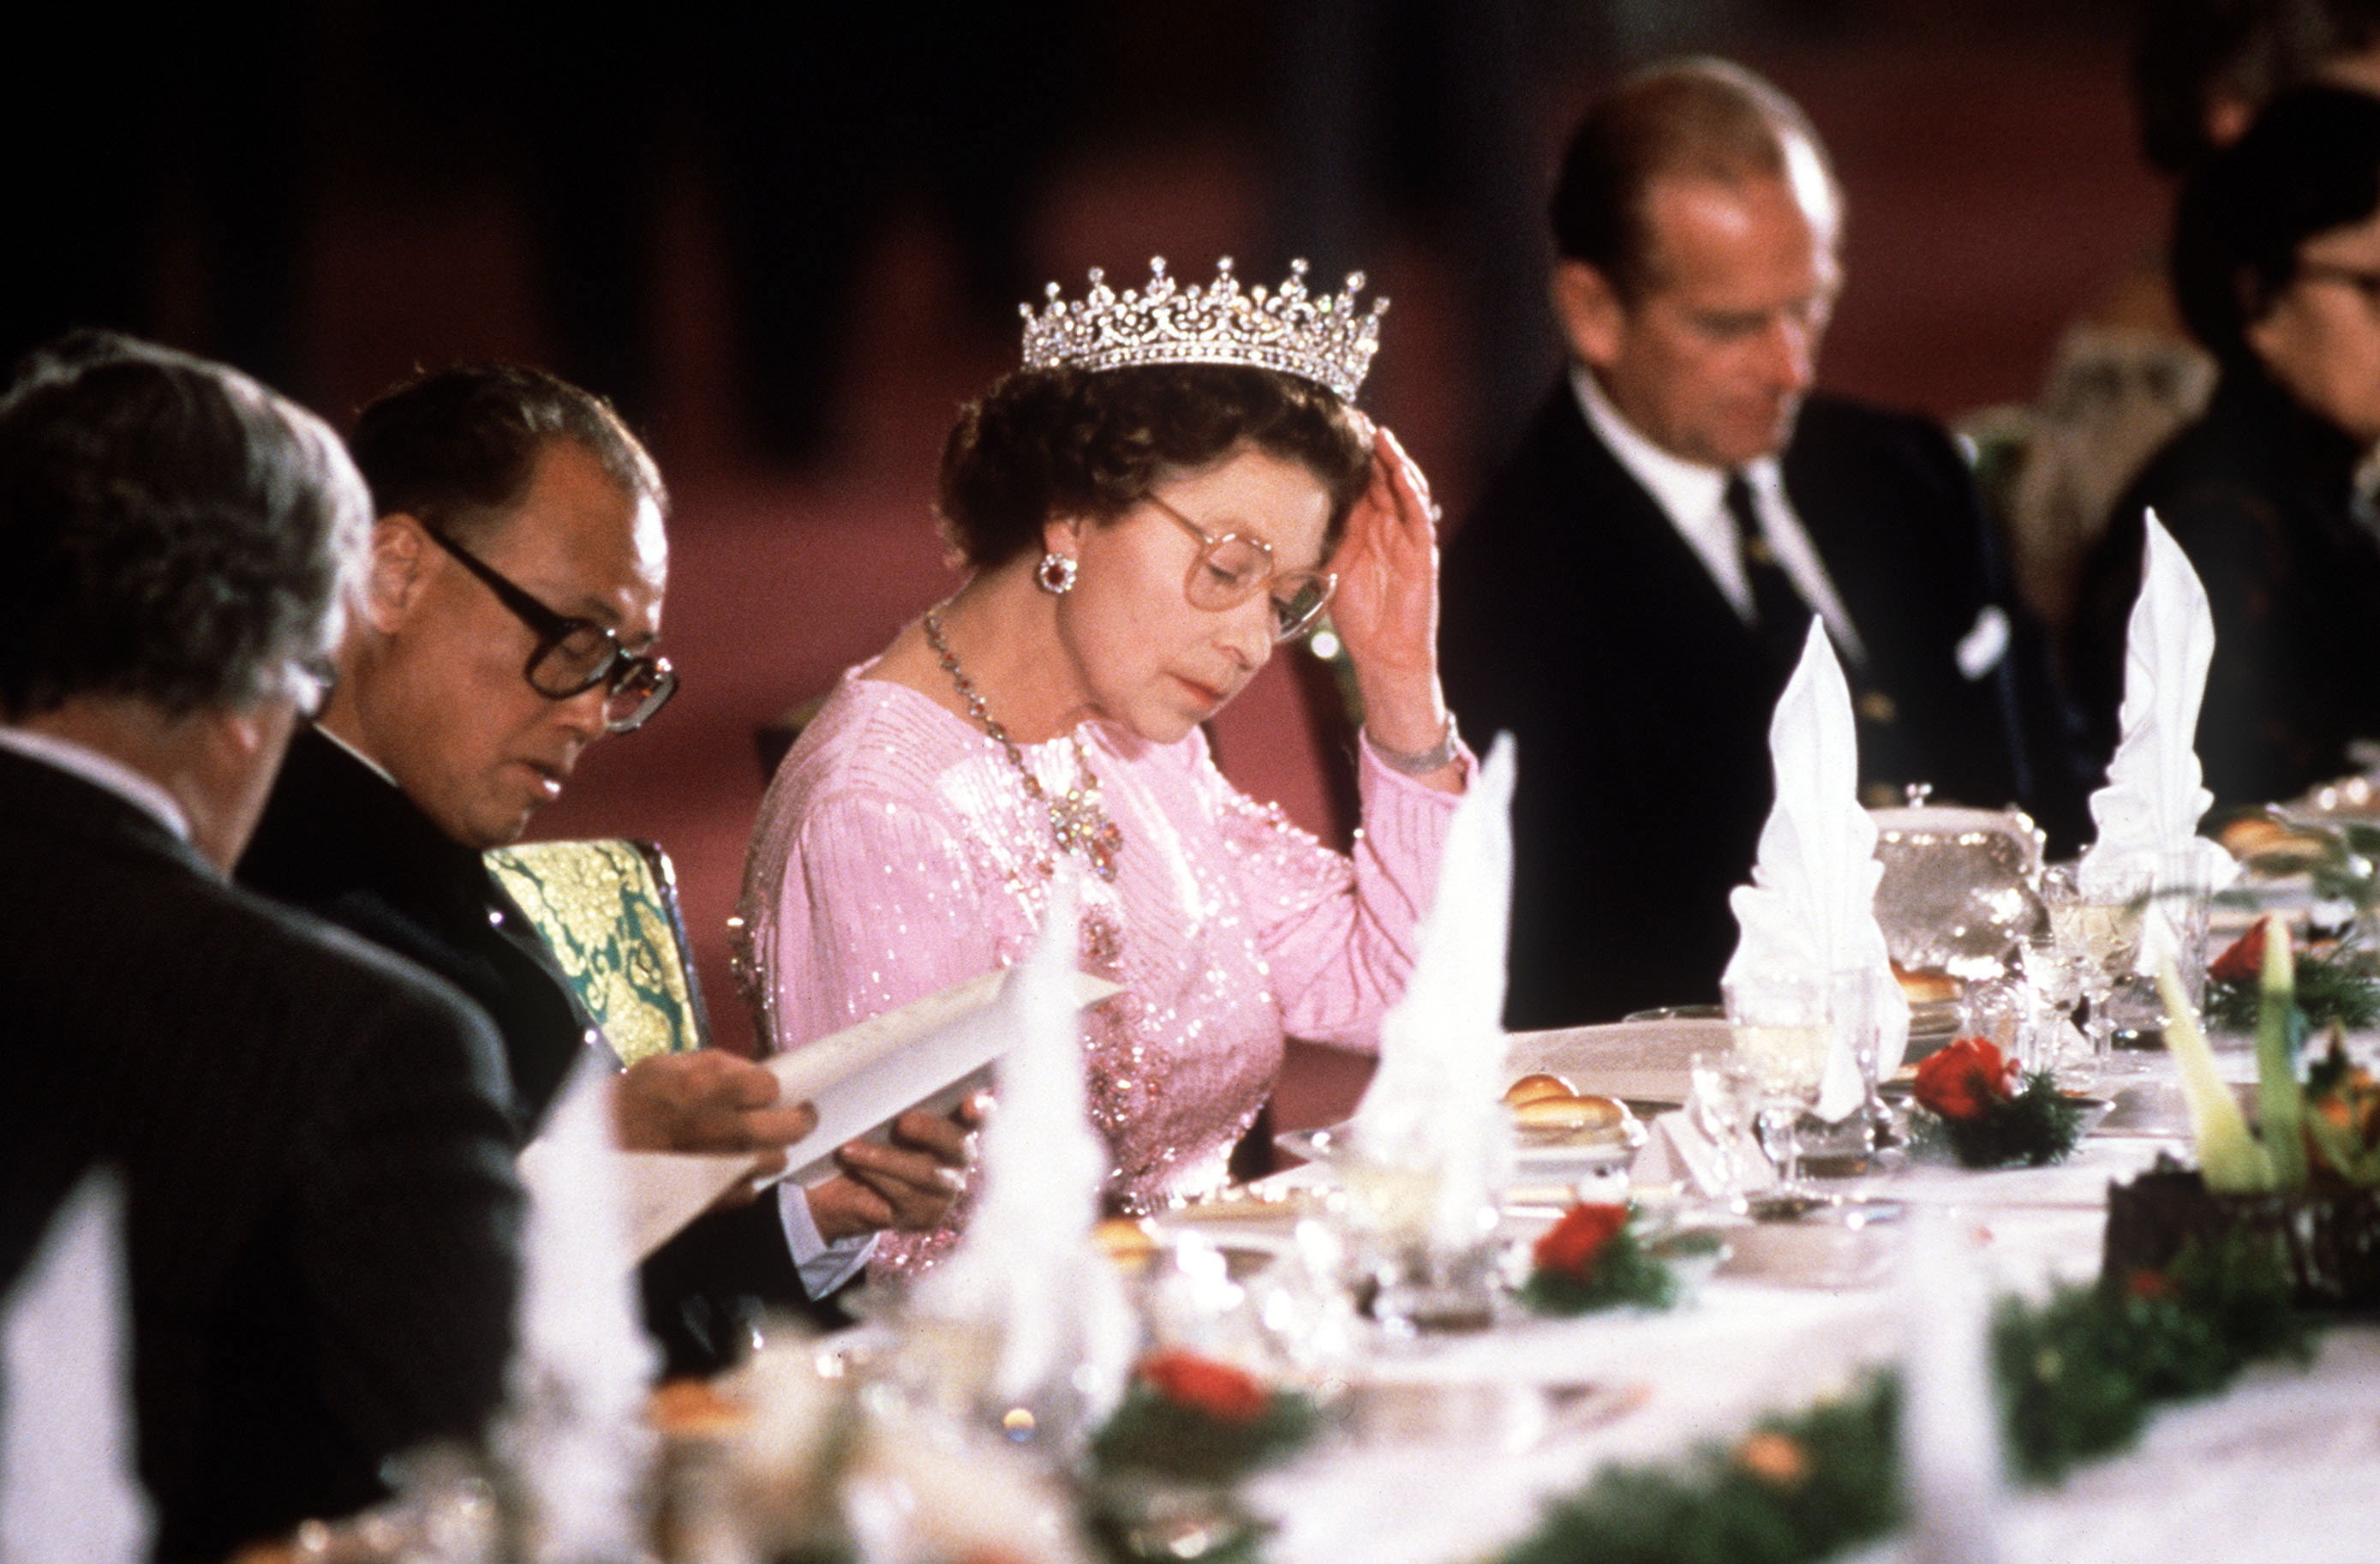 <strong>Guests&nbsp;are expected to follow long-standing Royal dinner etiquette of 'pacing' their meal with the Queen</strong>